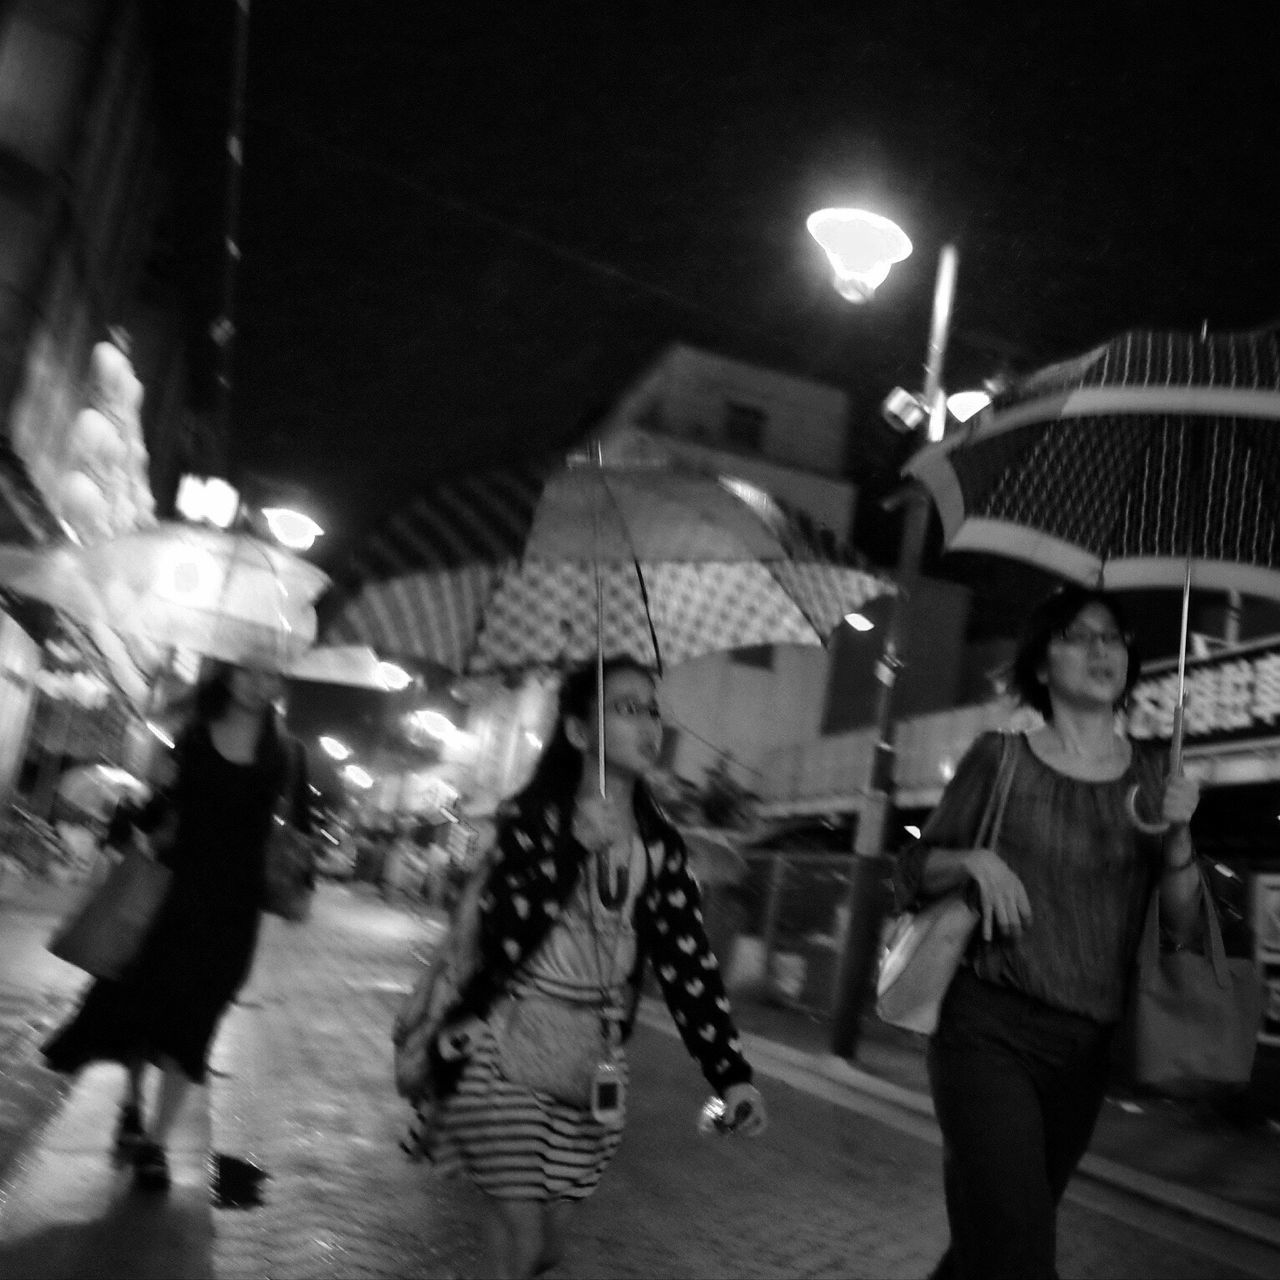 illuminated, street, walking, city, city life, night, blurred motion, travel, men, building exterior, lifestyles, city street, rush hour, large group of people, built structure, road, leisure activity, on the move, transportation, architecture, casual clothing, person, holding, mode of transport, selective focus, group of people, crowd